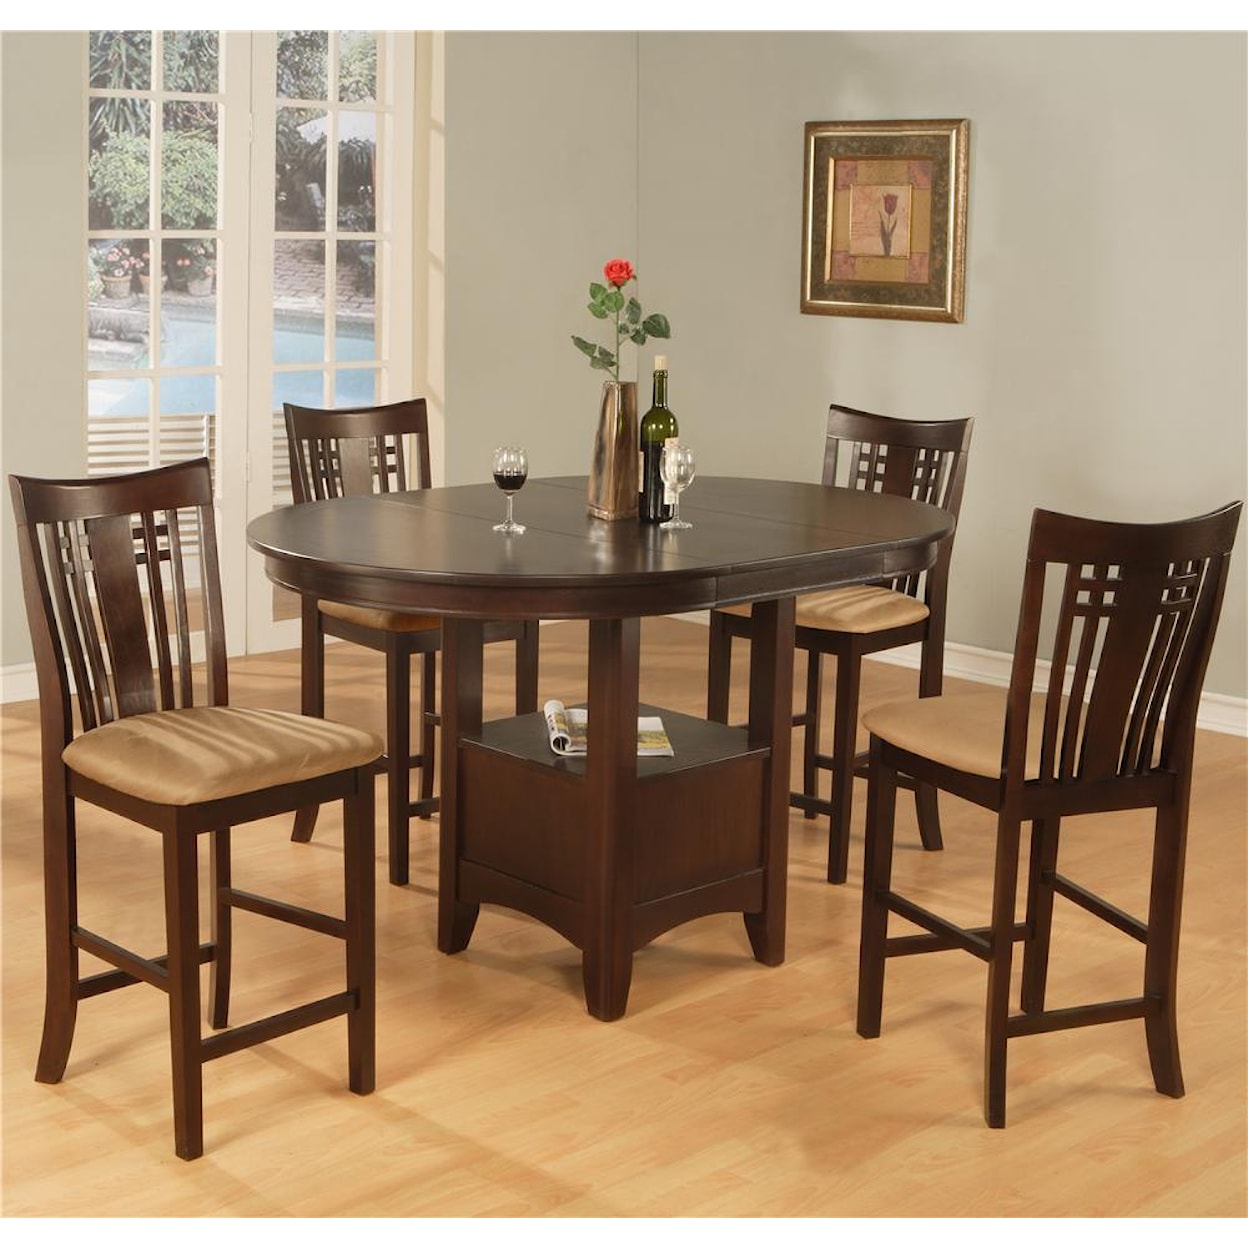 Primo International 956 Counter Dining Table and 4 Chairs